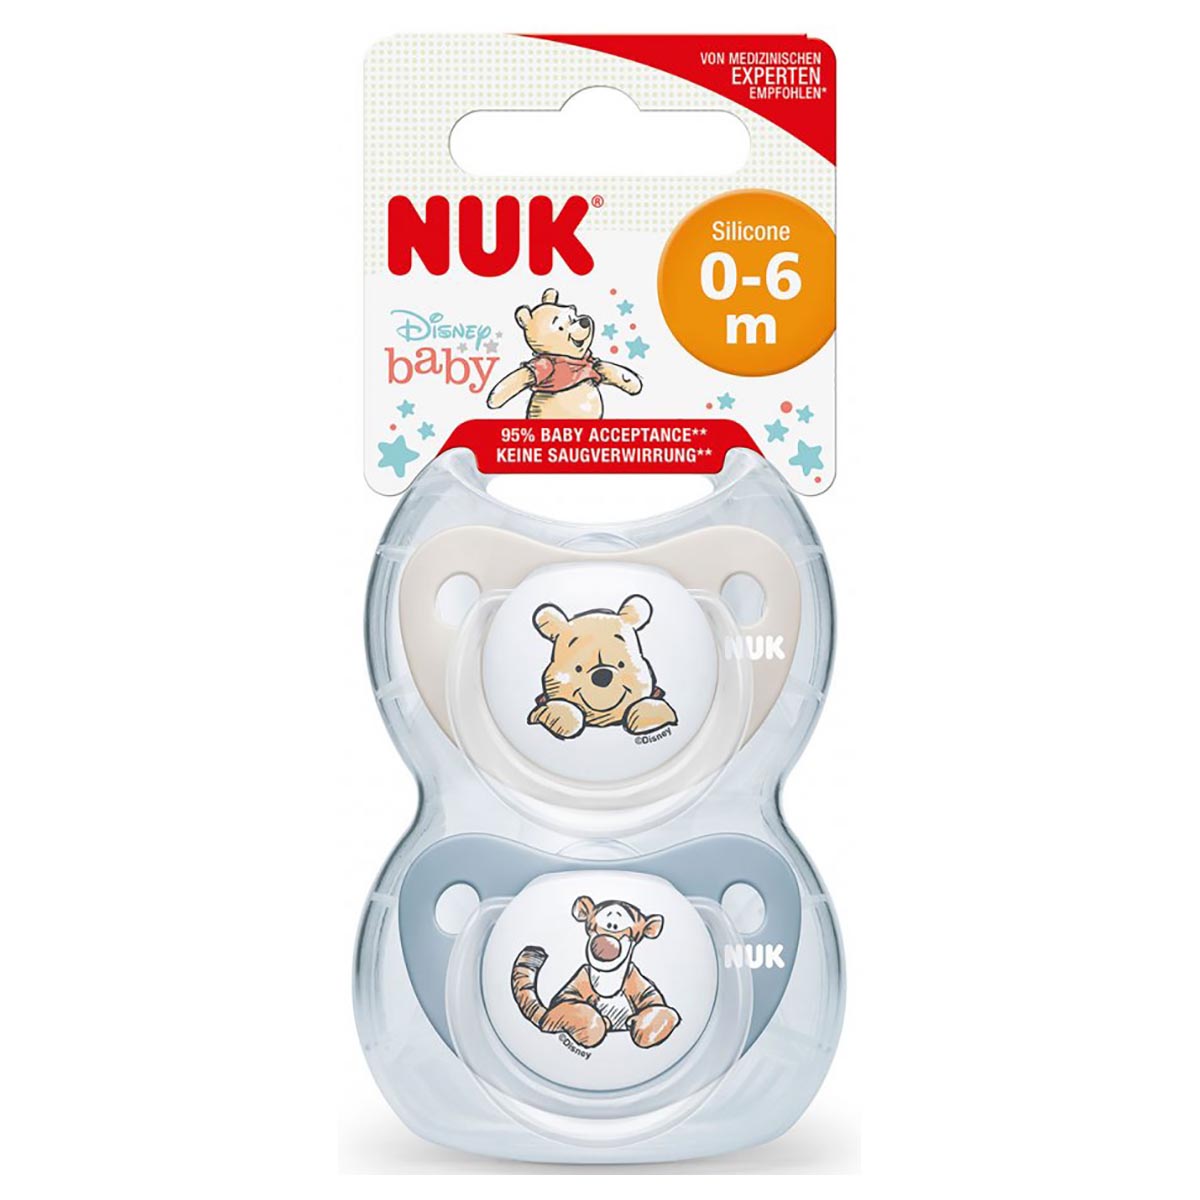 NUK Newborn Baby Girl Soother Dummy Pack of 2 Pink Latex Teat Age 0-6 Months 